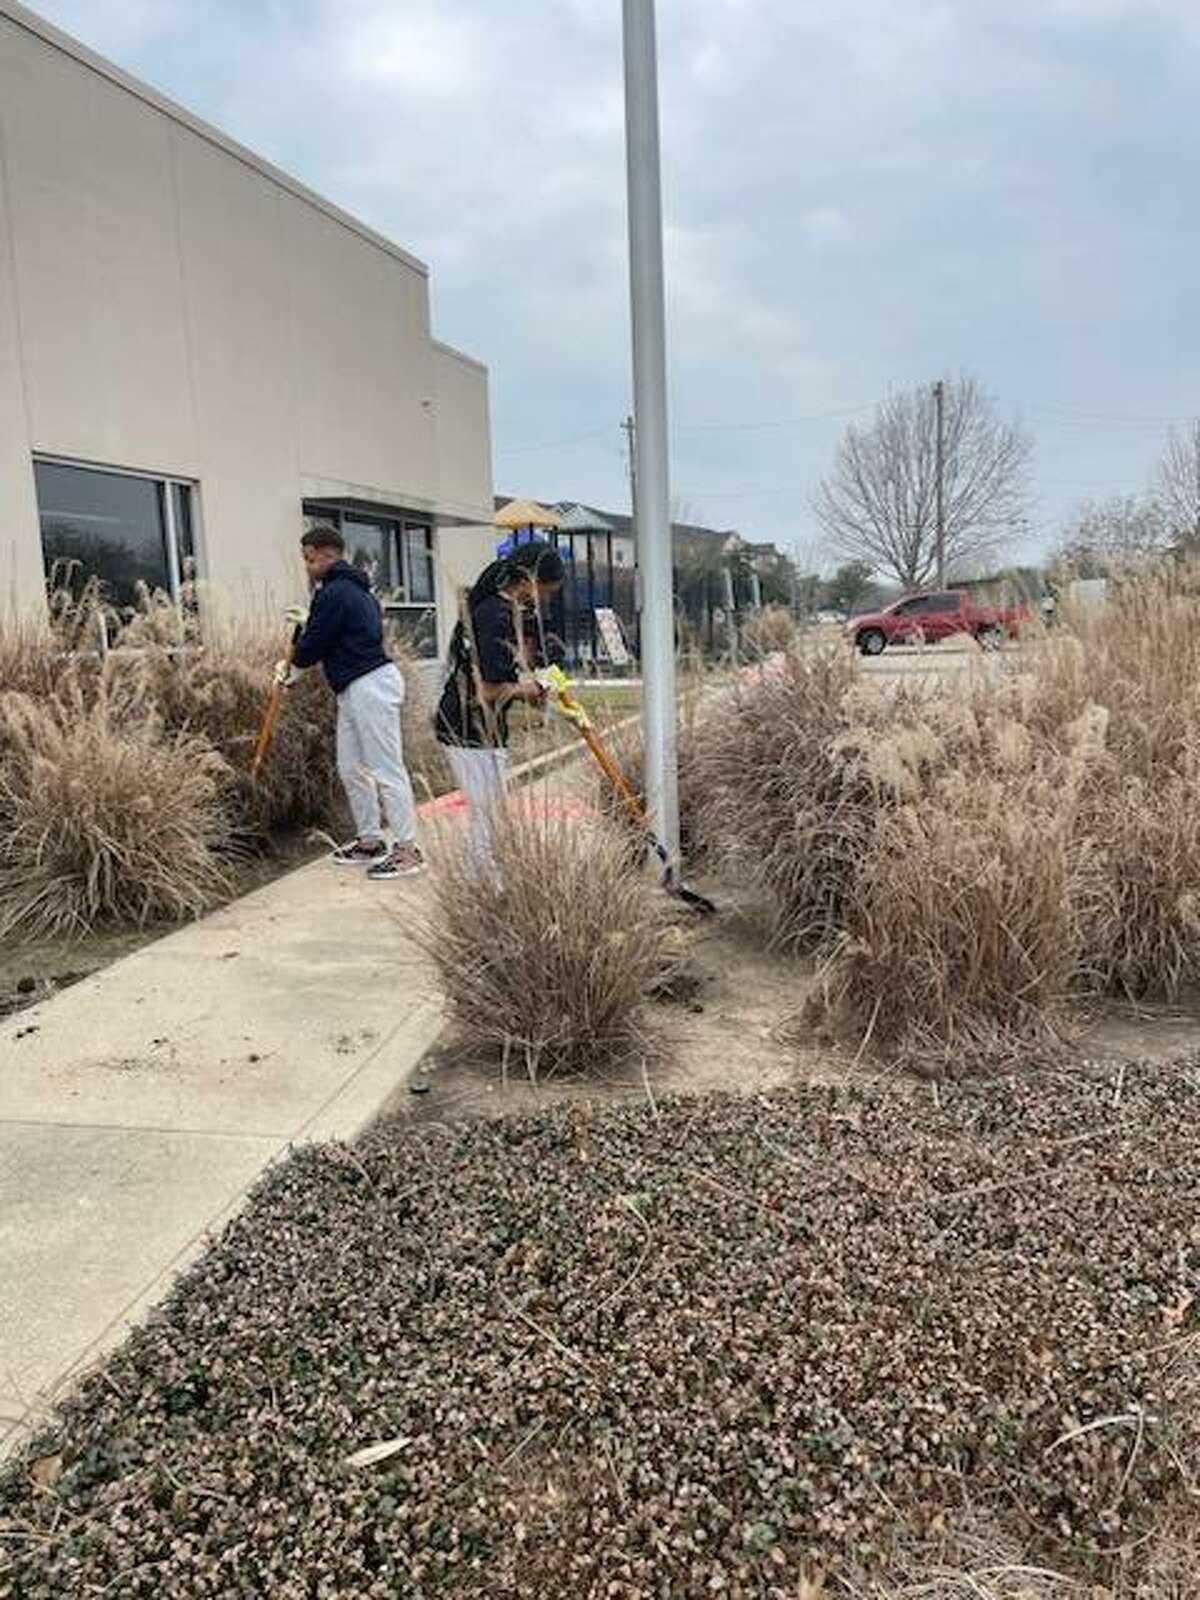 Volunteers cleaned out, weeded, mulched and repaired the area outside the West Orem Family YMCA on Monday. The facility had been closed since March 2020.